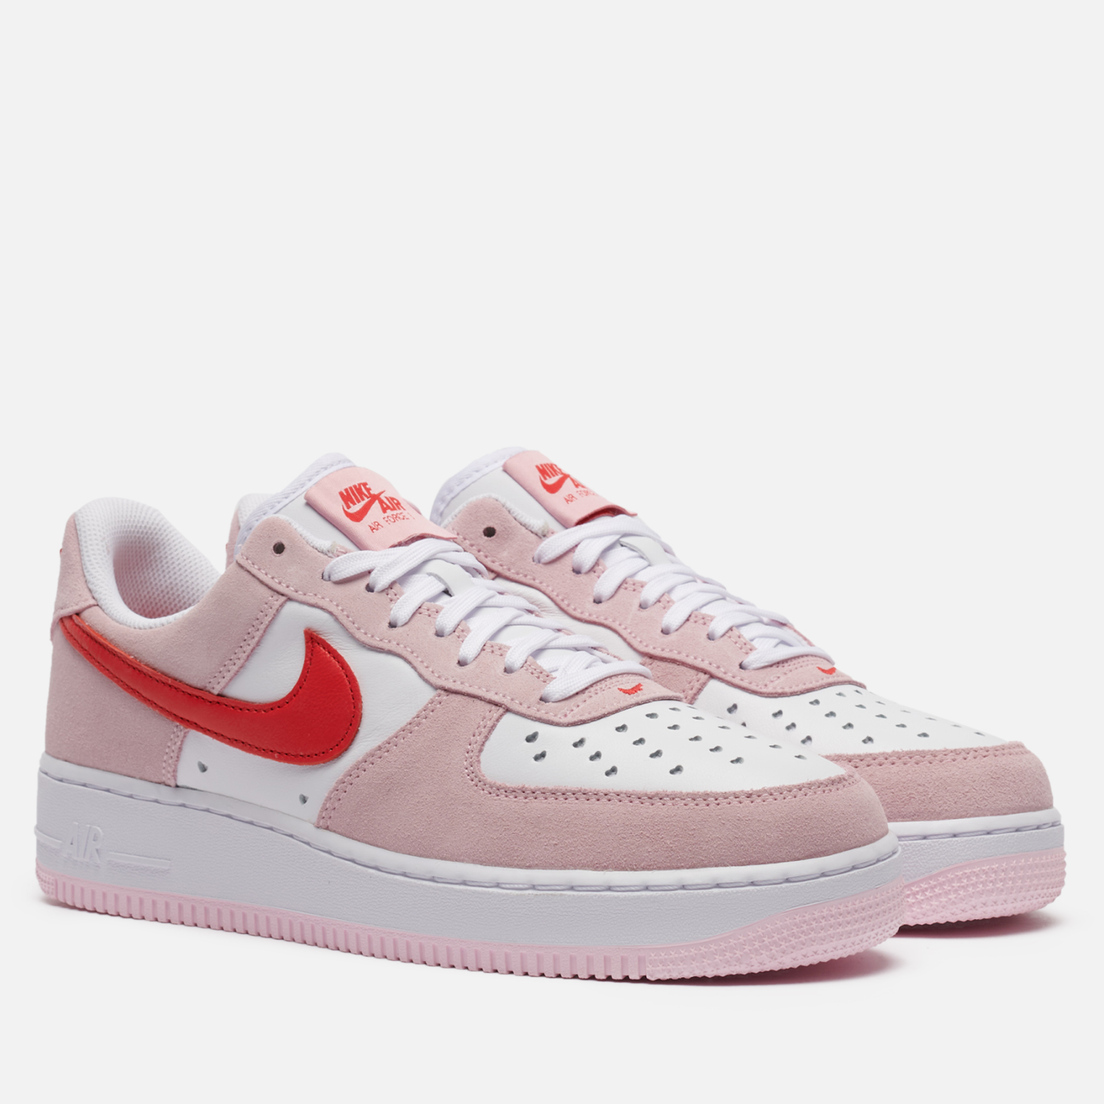 Air force 1 low valentine s day. Nike Air Force 1 Valentine's. Nike Air Force 1 Low “Valentine’s Day” 2023. Nike Air Force 1 Low Valentines Day. Nike Air Force 1 07 QS Valentine's Day.